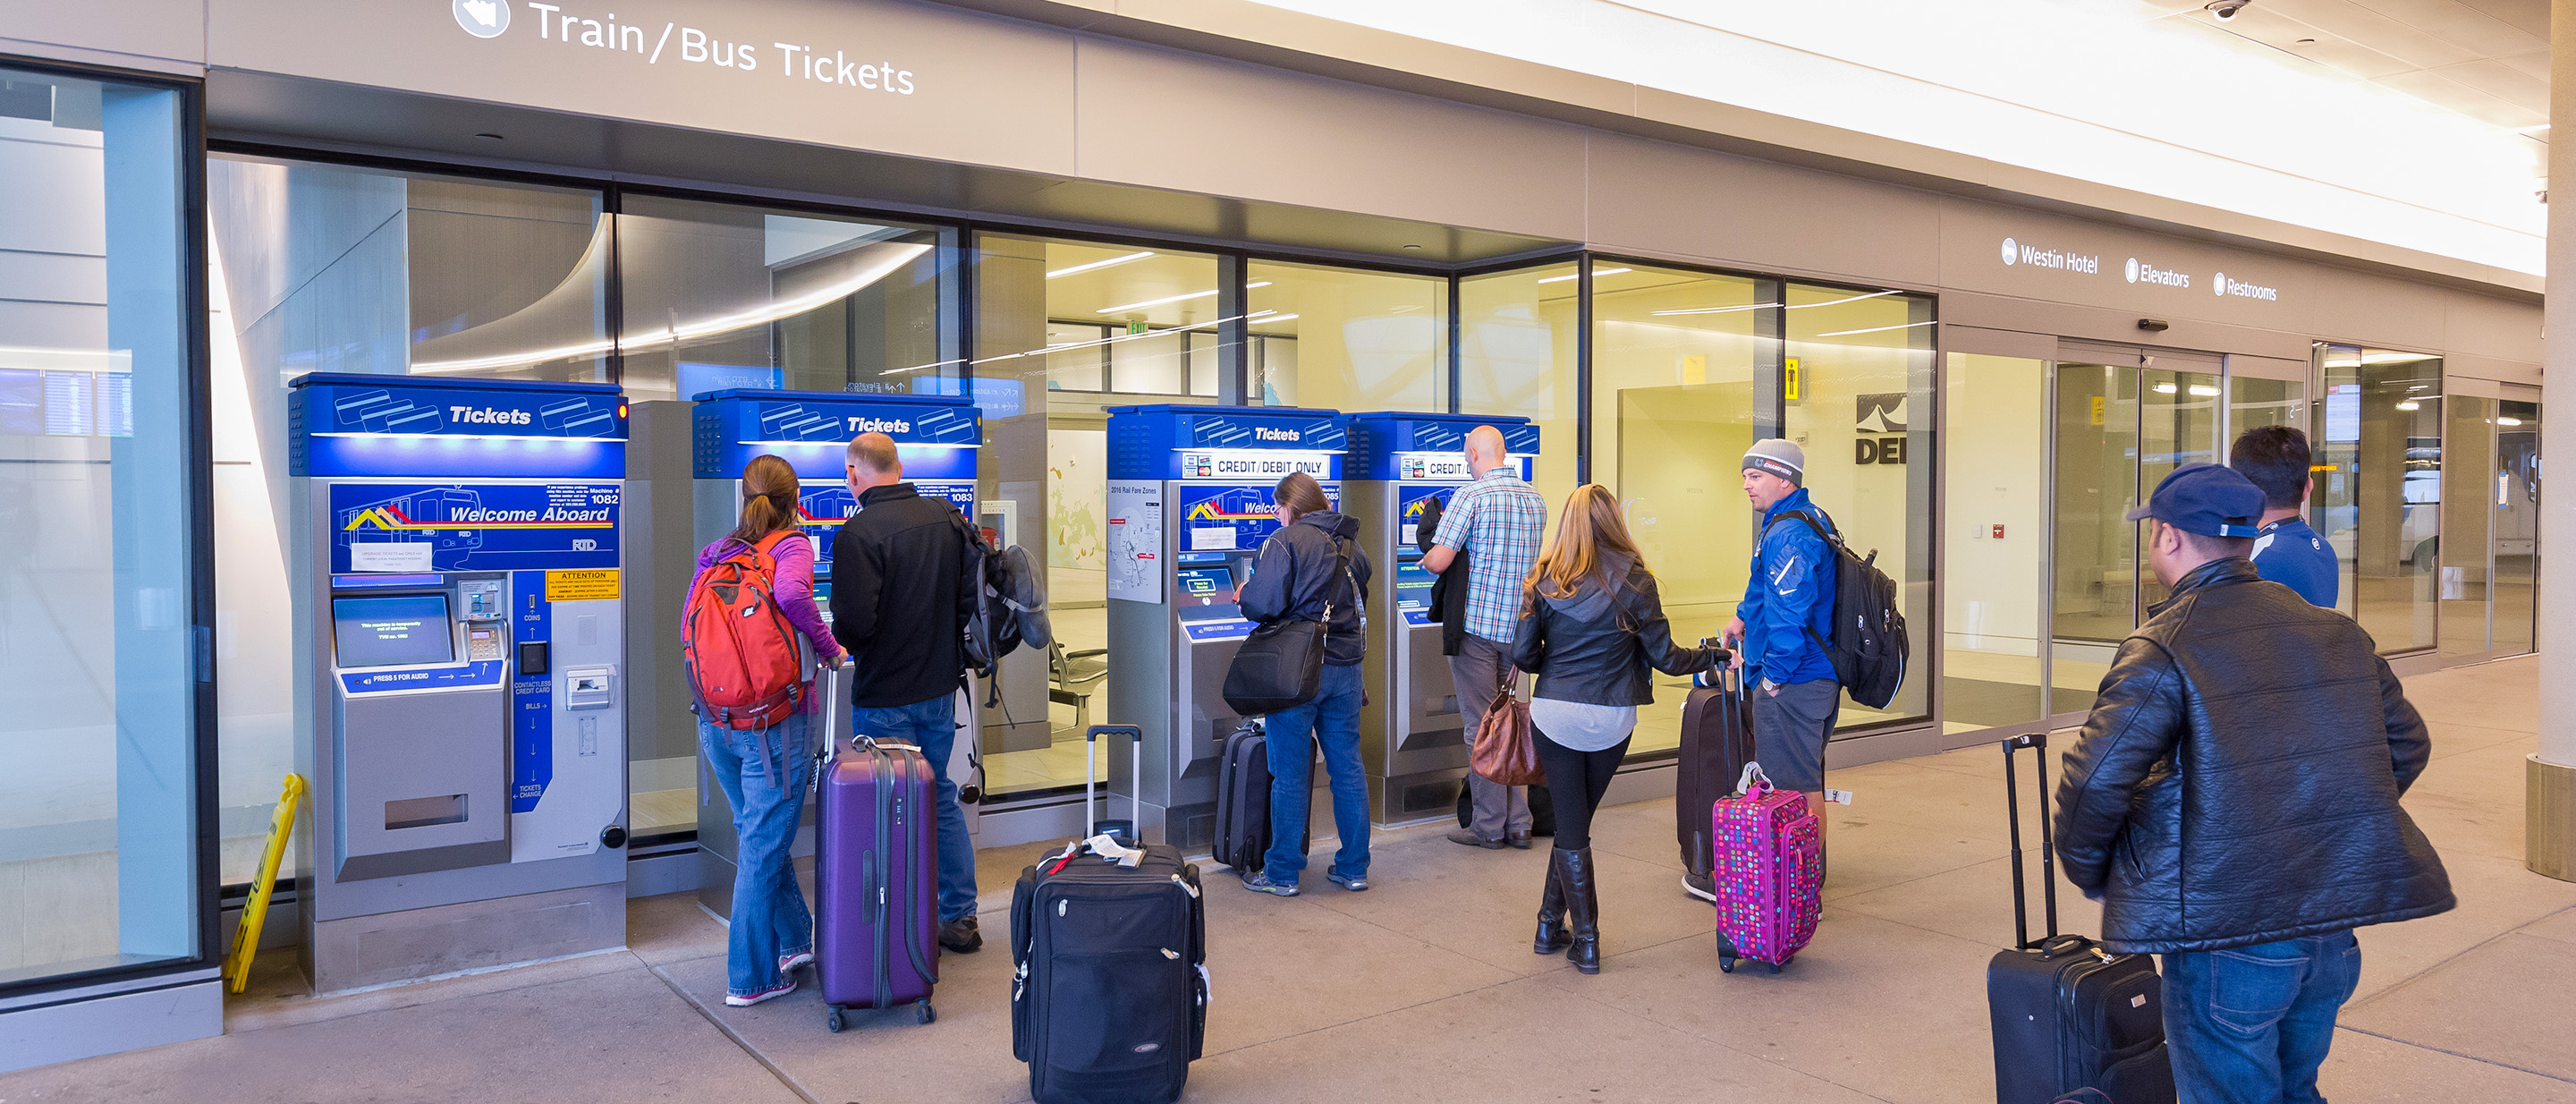 Customers in line to purchase a ticket at the airport